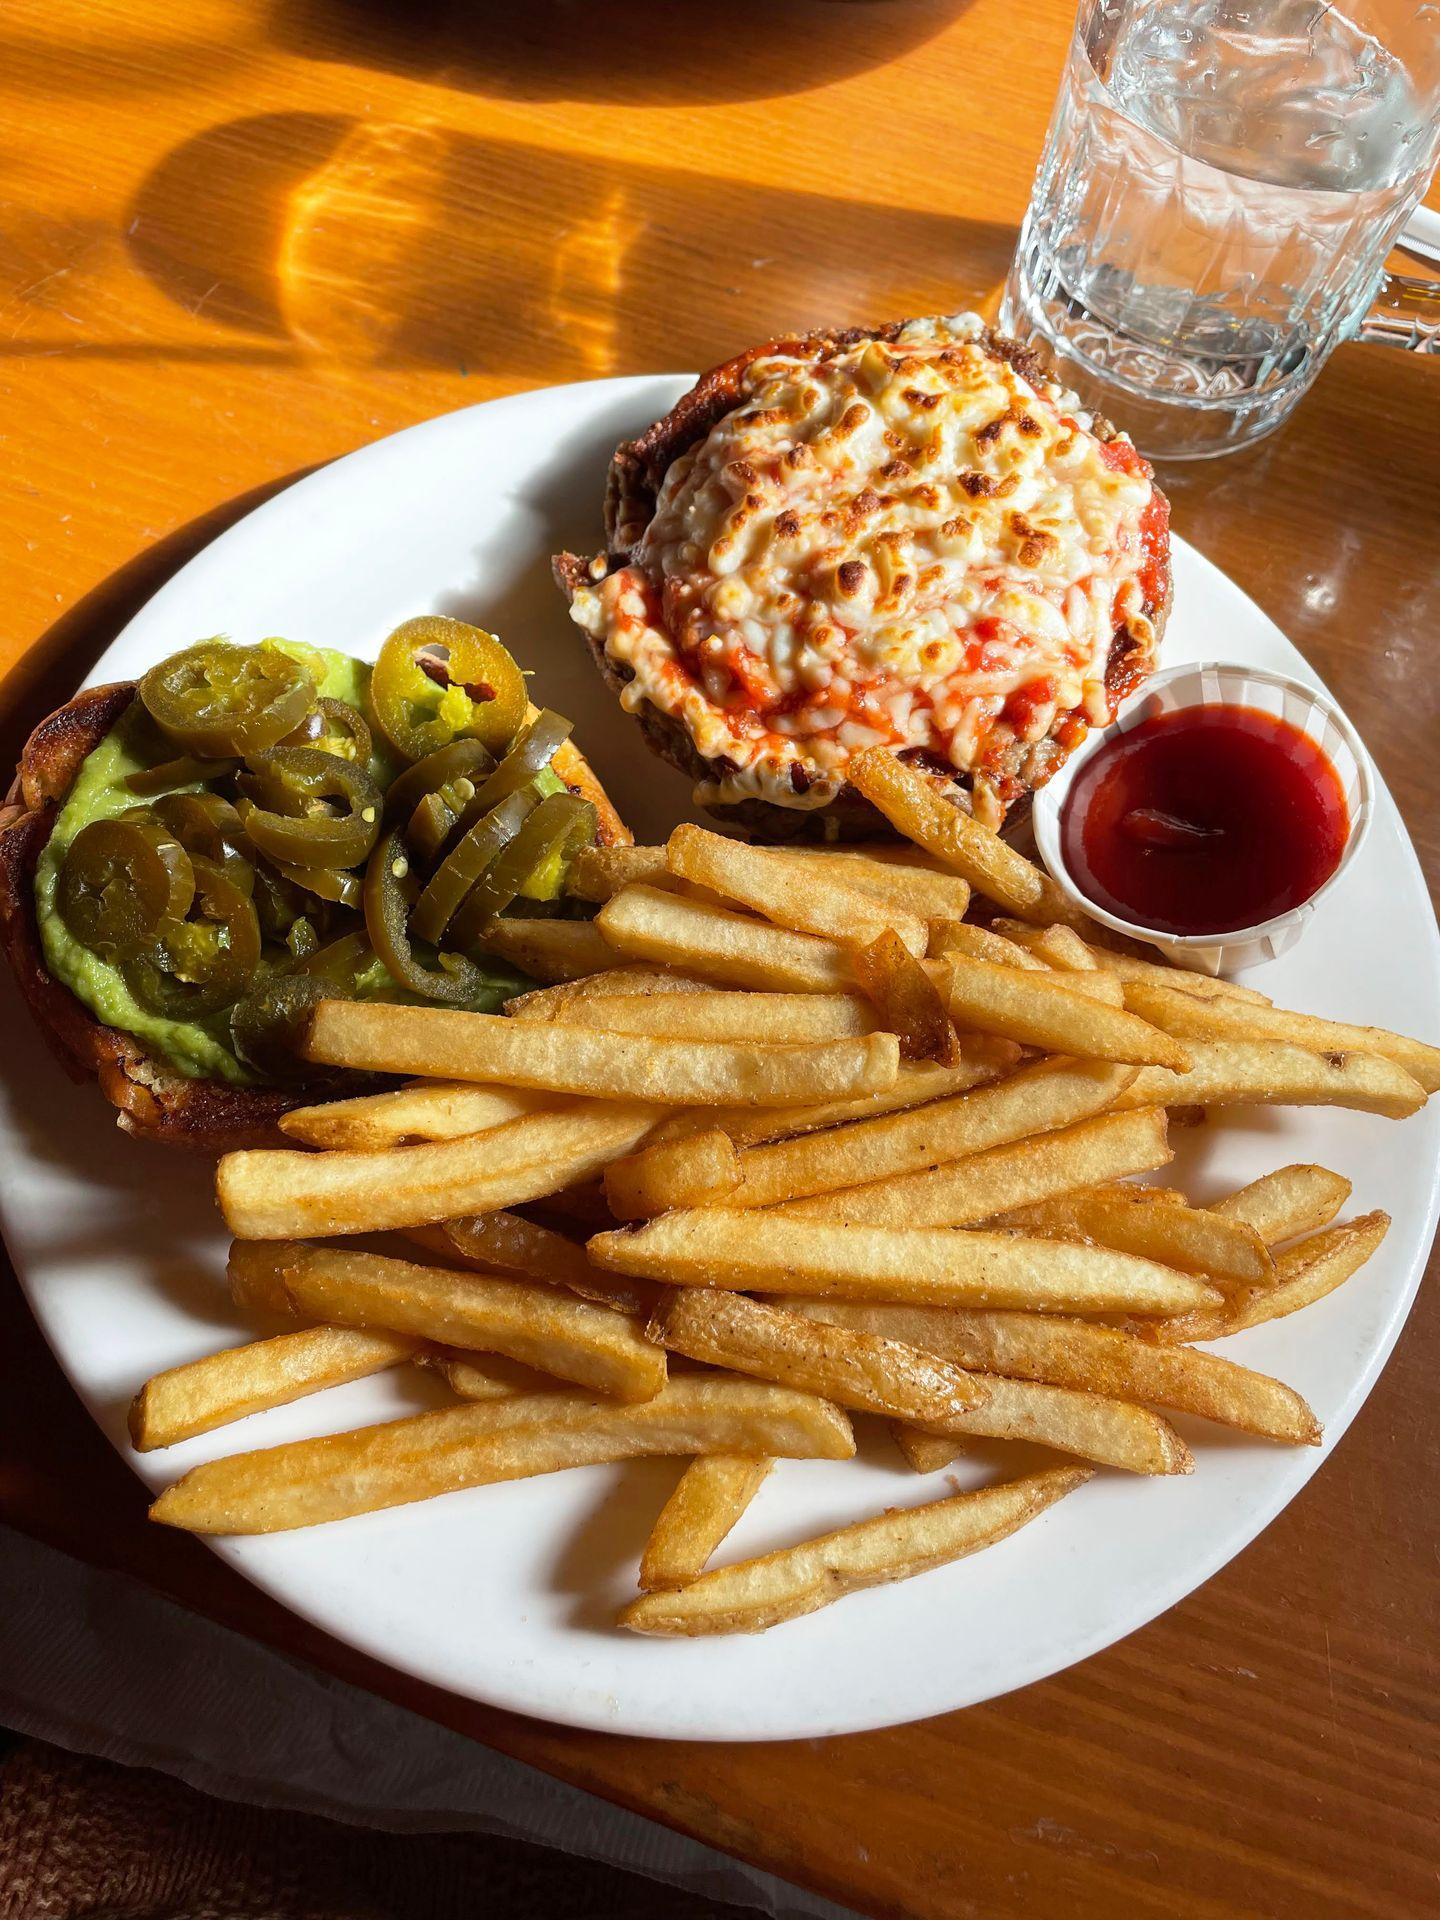 A plate with a burger and fries from Tommy's Neighborhood Pub.